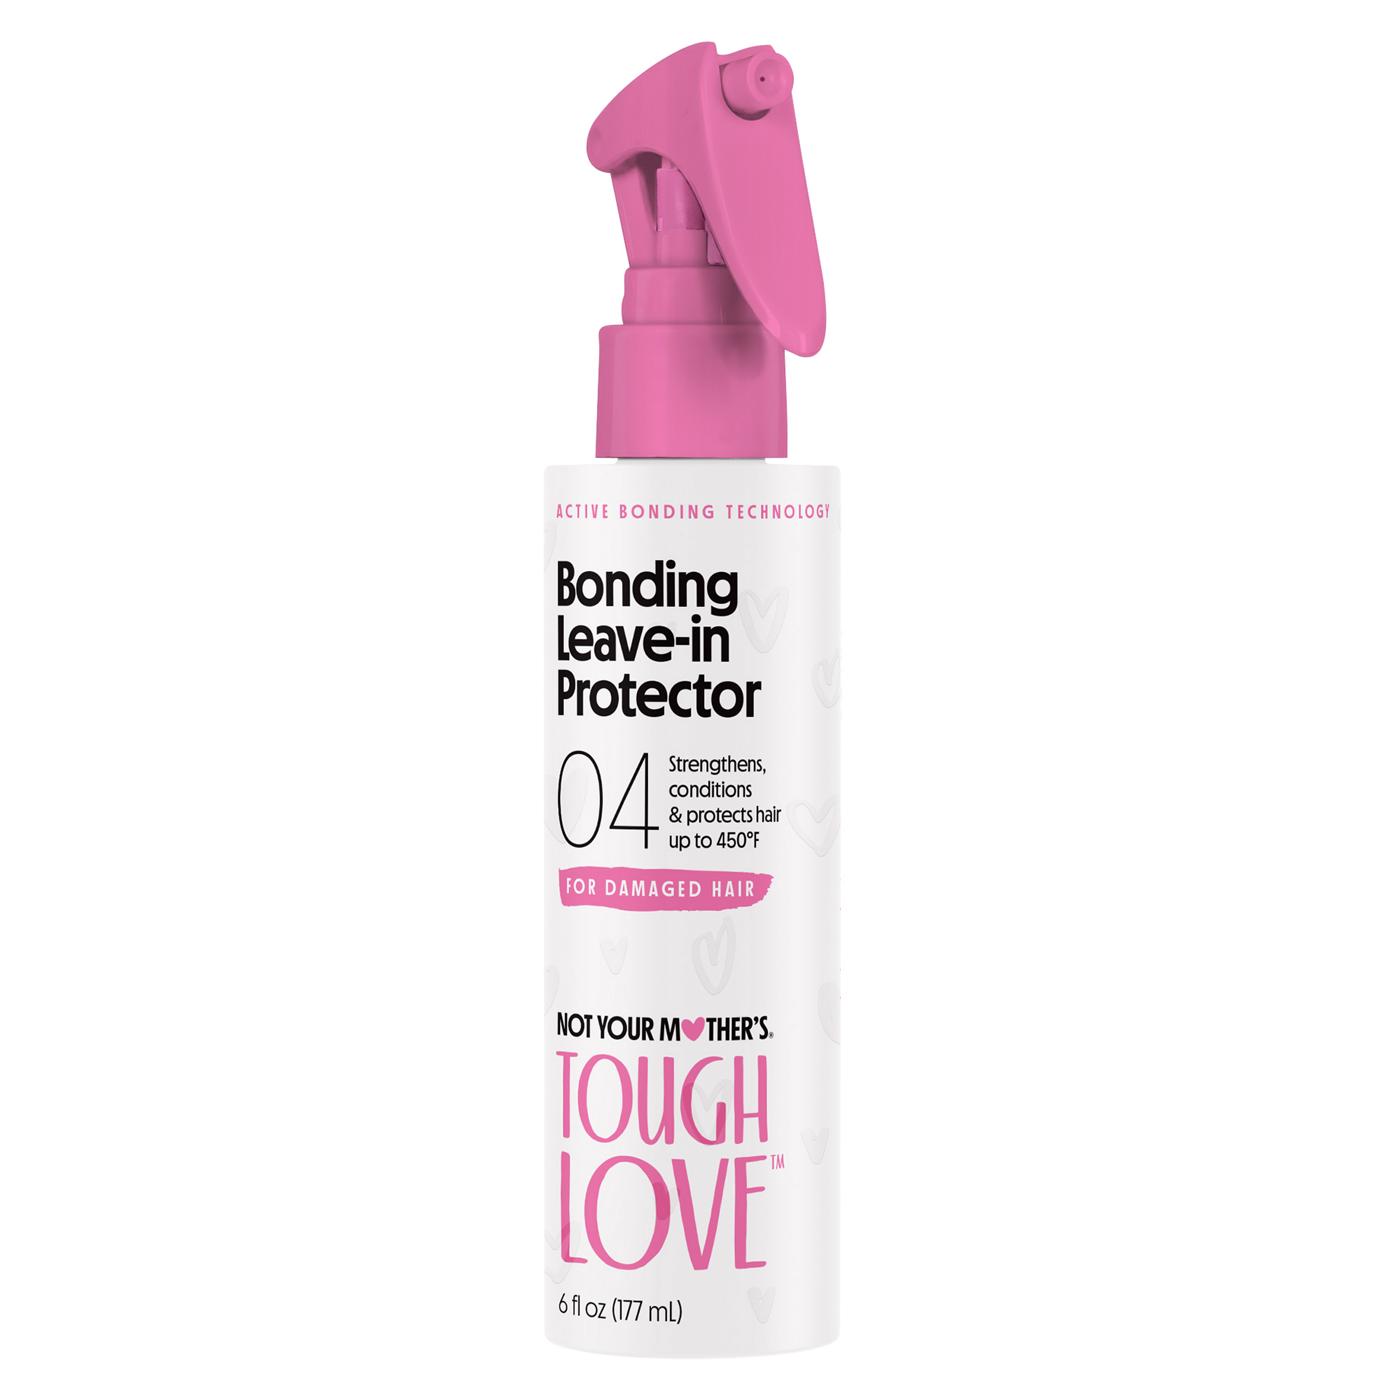 Not Your Mother's Tough Love Bonding Leave-In Protector; image 1 of 2